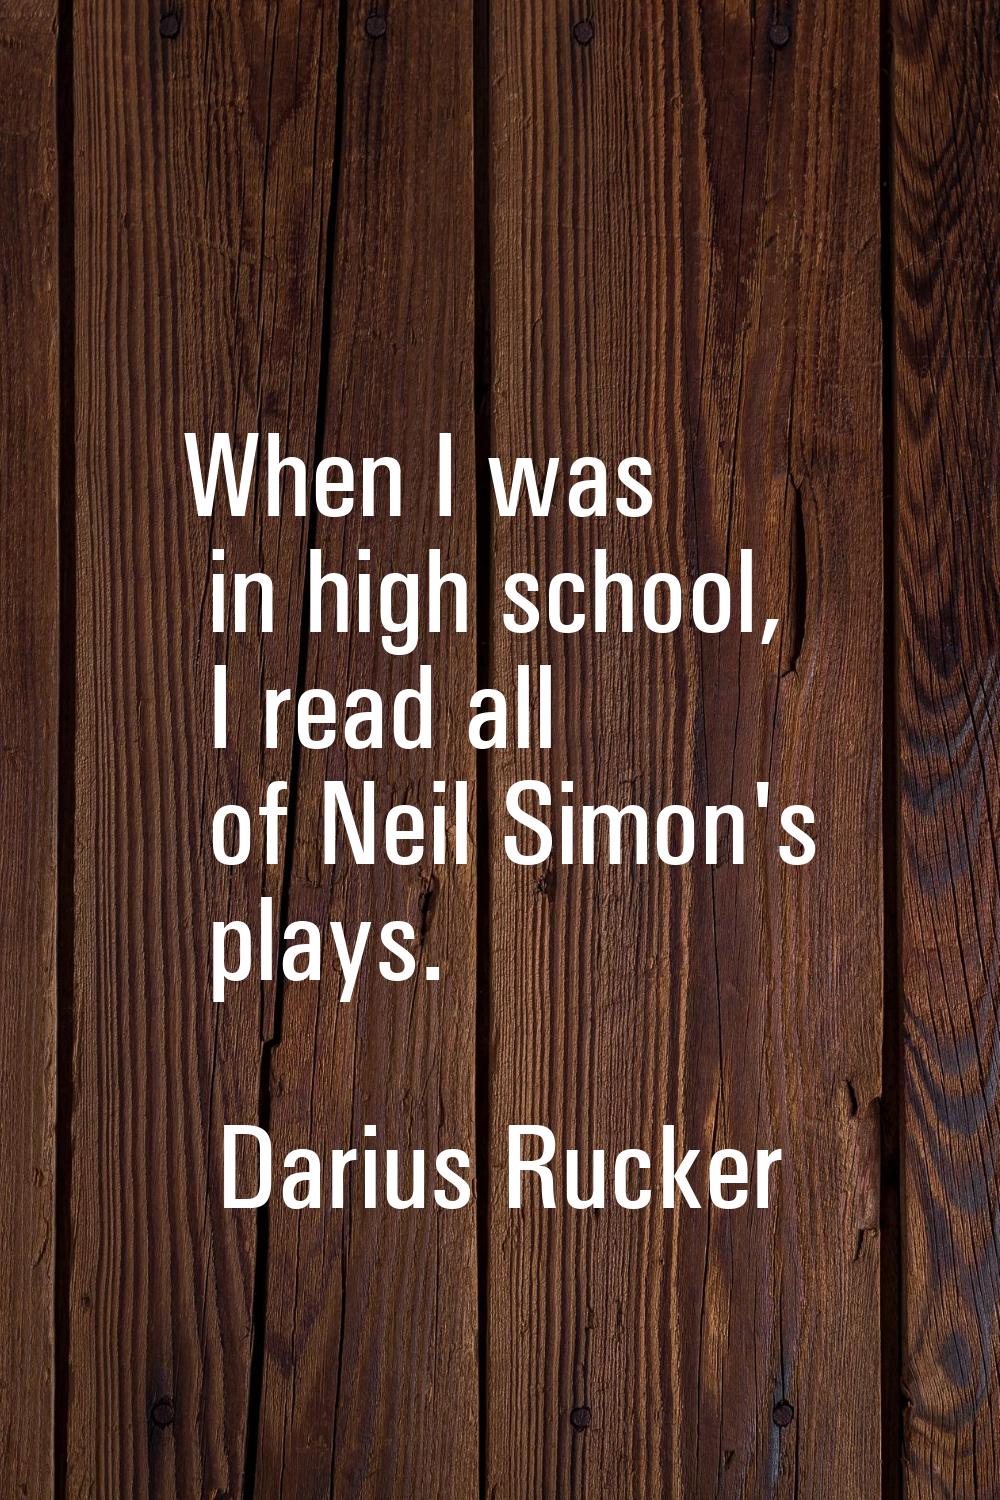 When I was in high school, I read all of Neil Simon's plays.